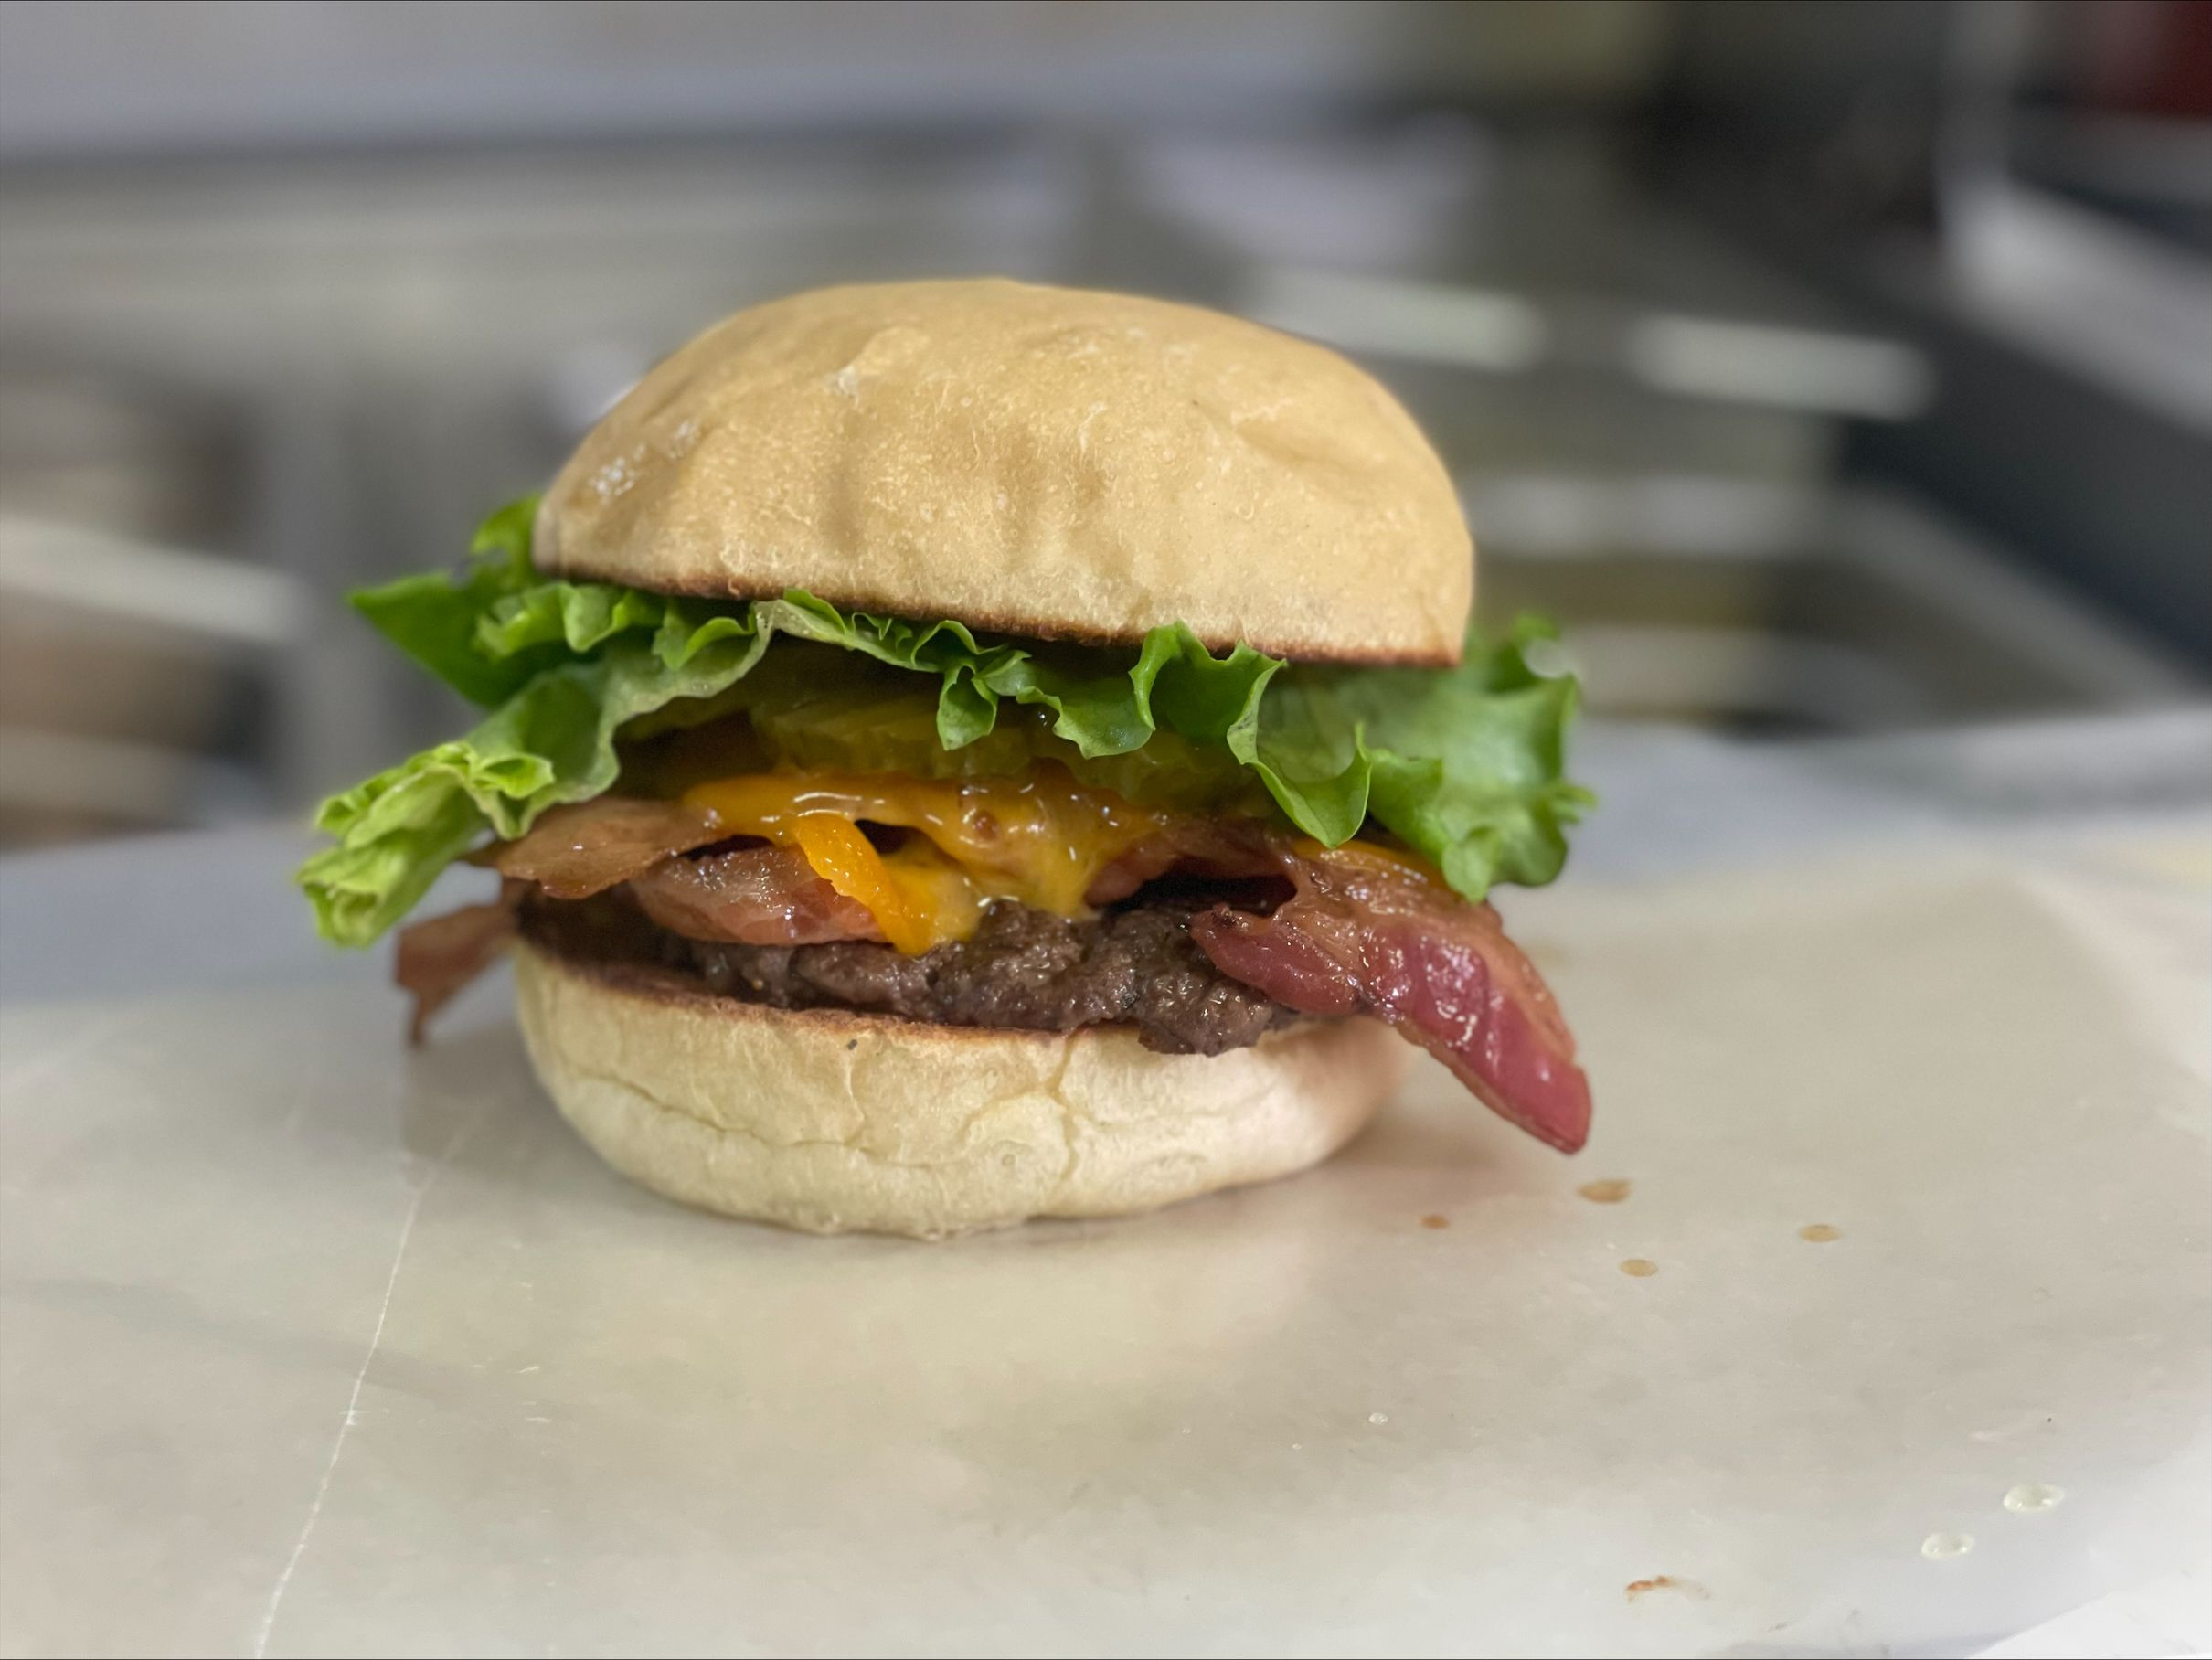 On The Road: Stop by Brenda’s Burgers for some award-winning food